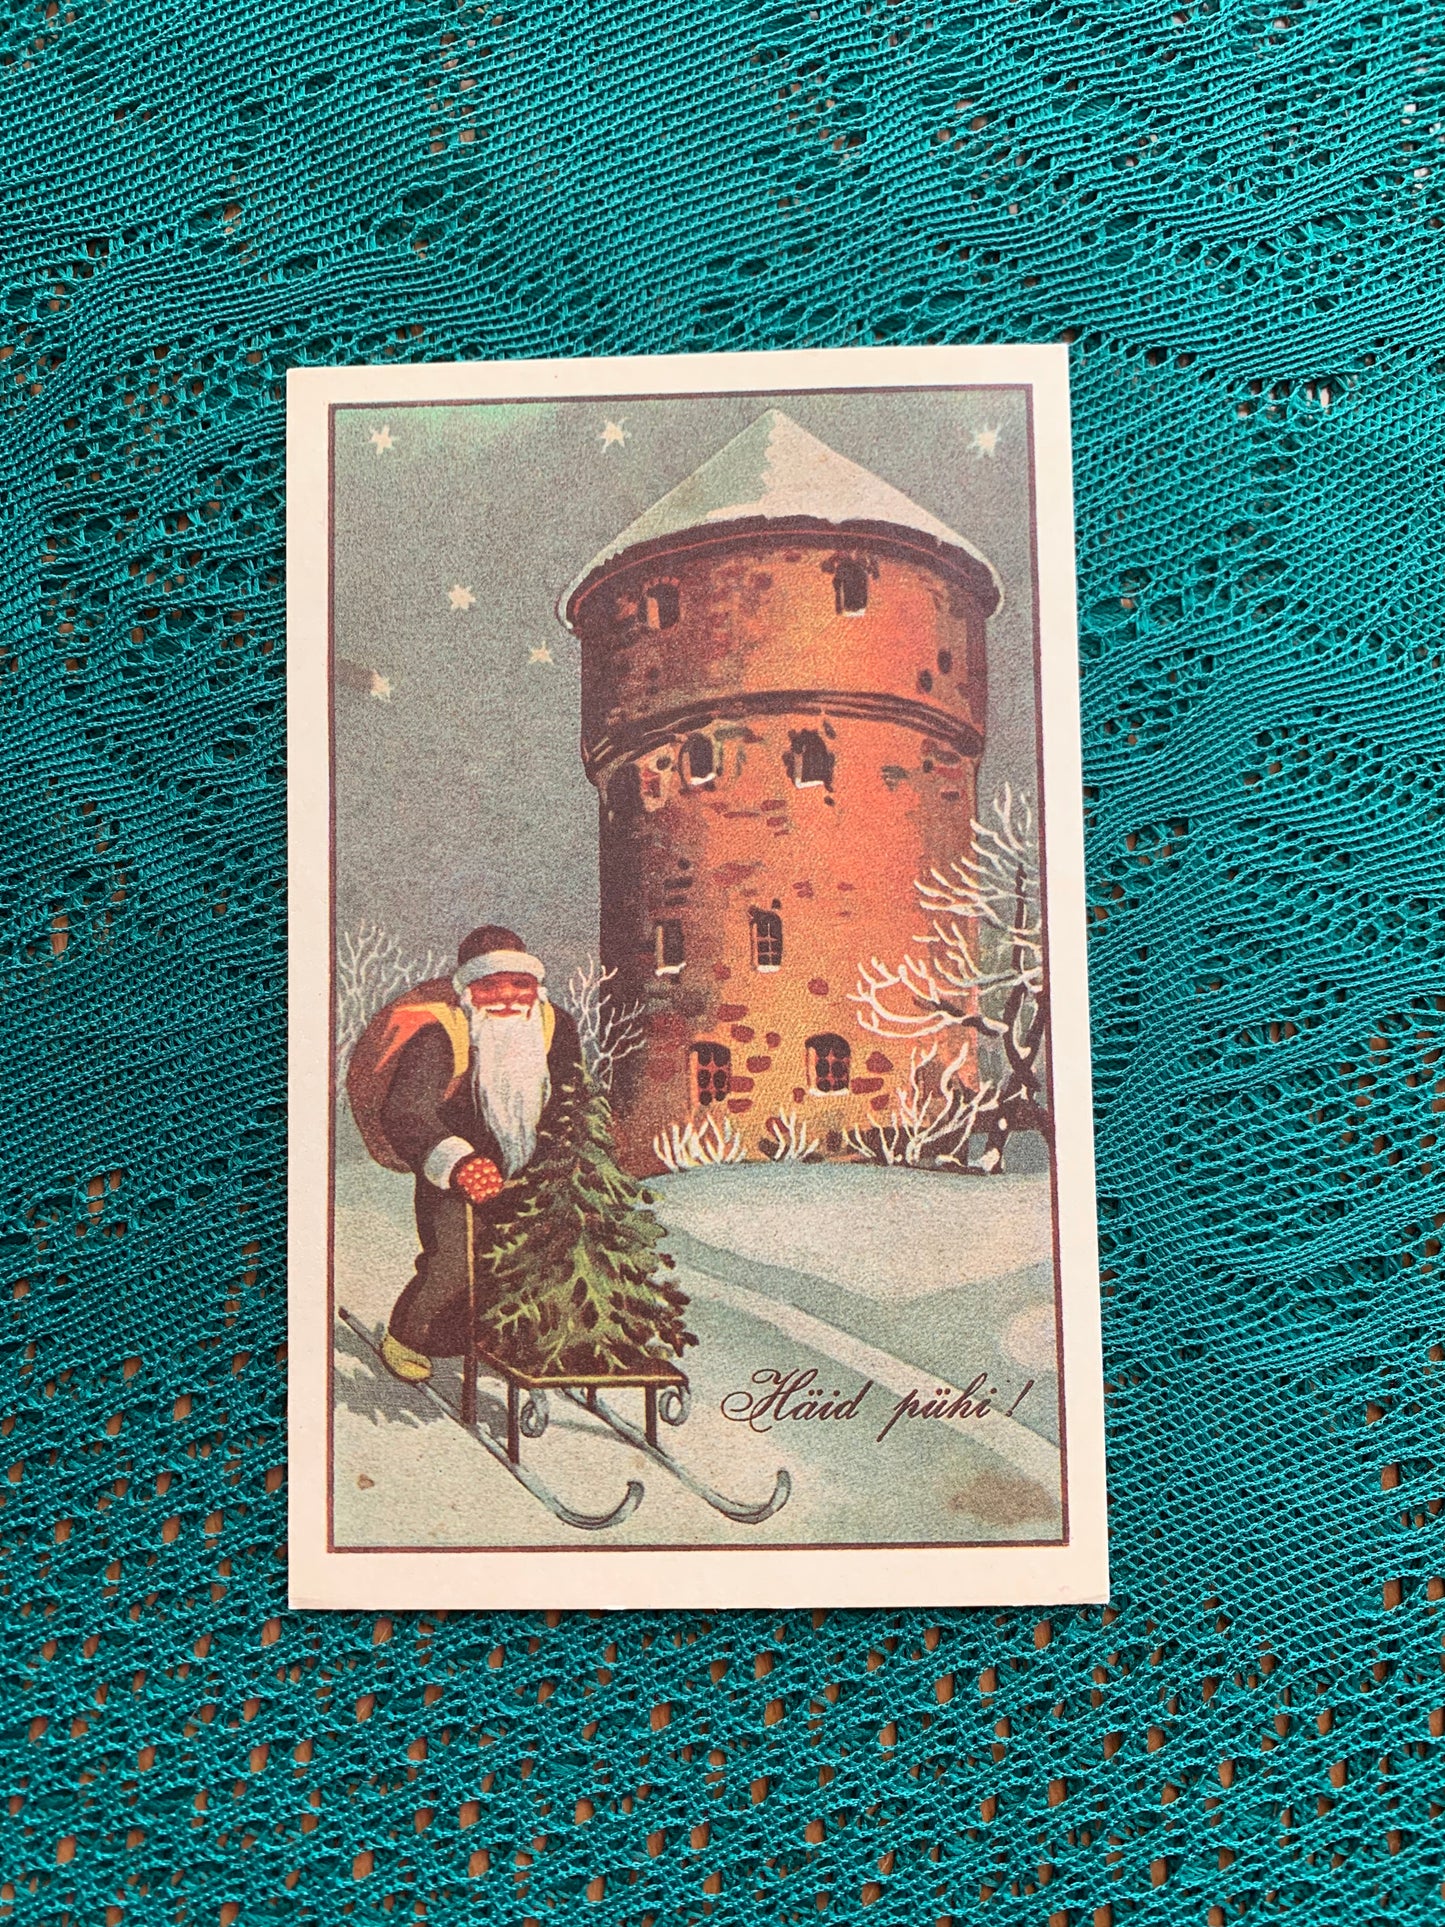 Estonian Christmas / New Year Greeting card - Reproduction from old postcard - Santa Claus with Christmas tree - 1988 - unused